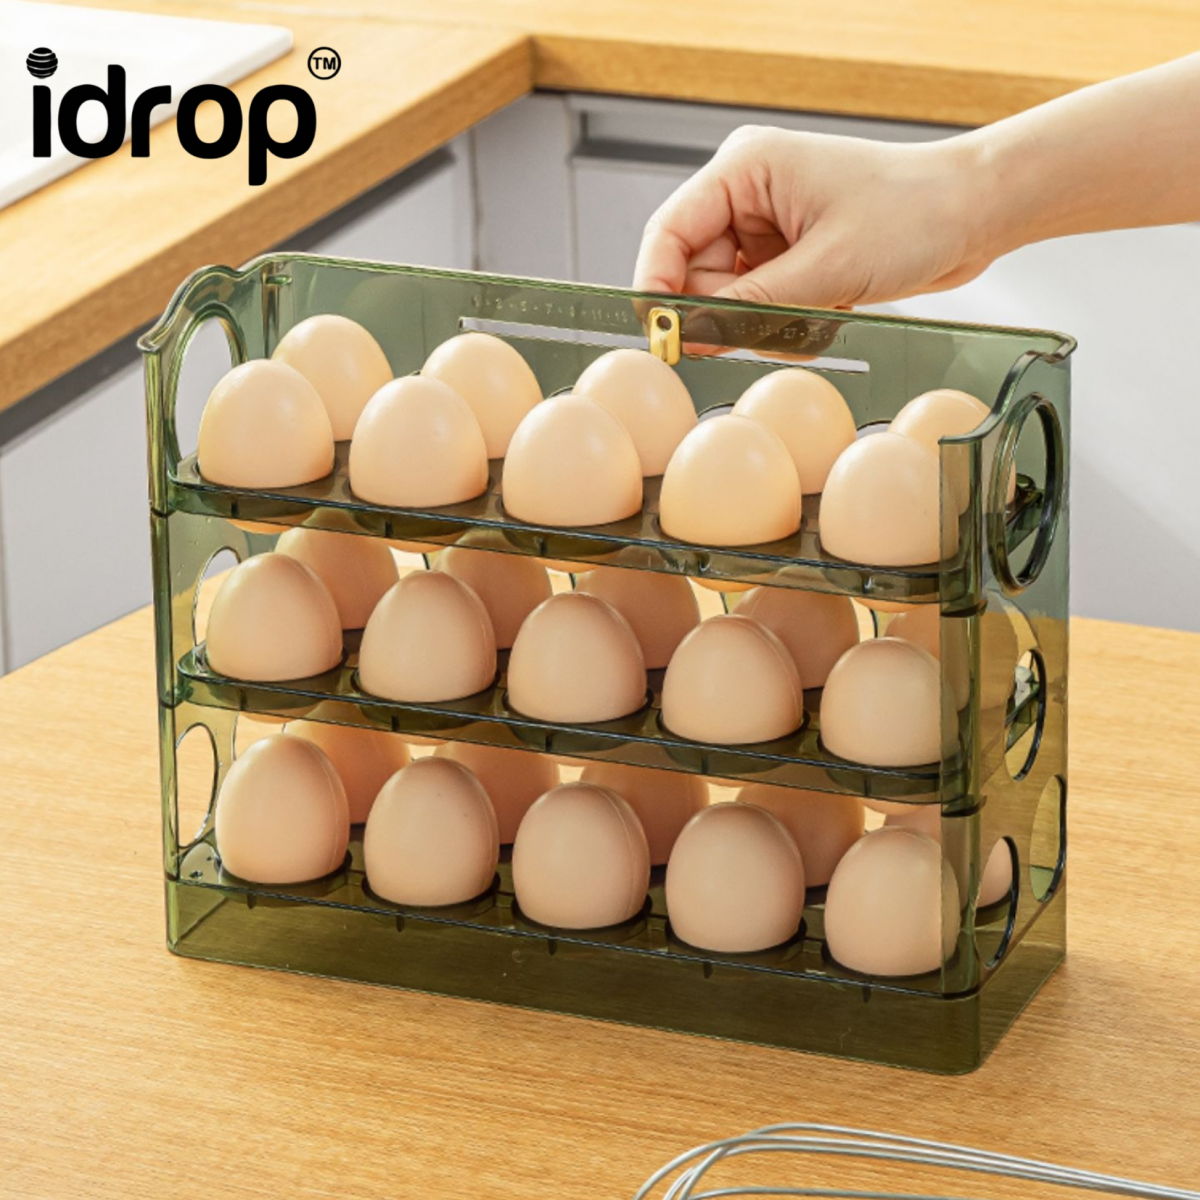 refrigerator uses the side door to flip and put the egg carton